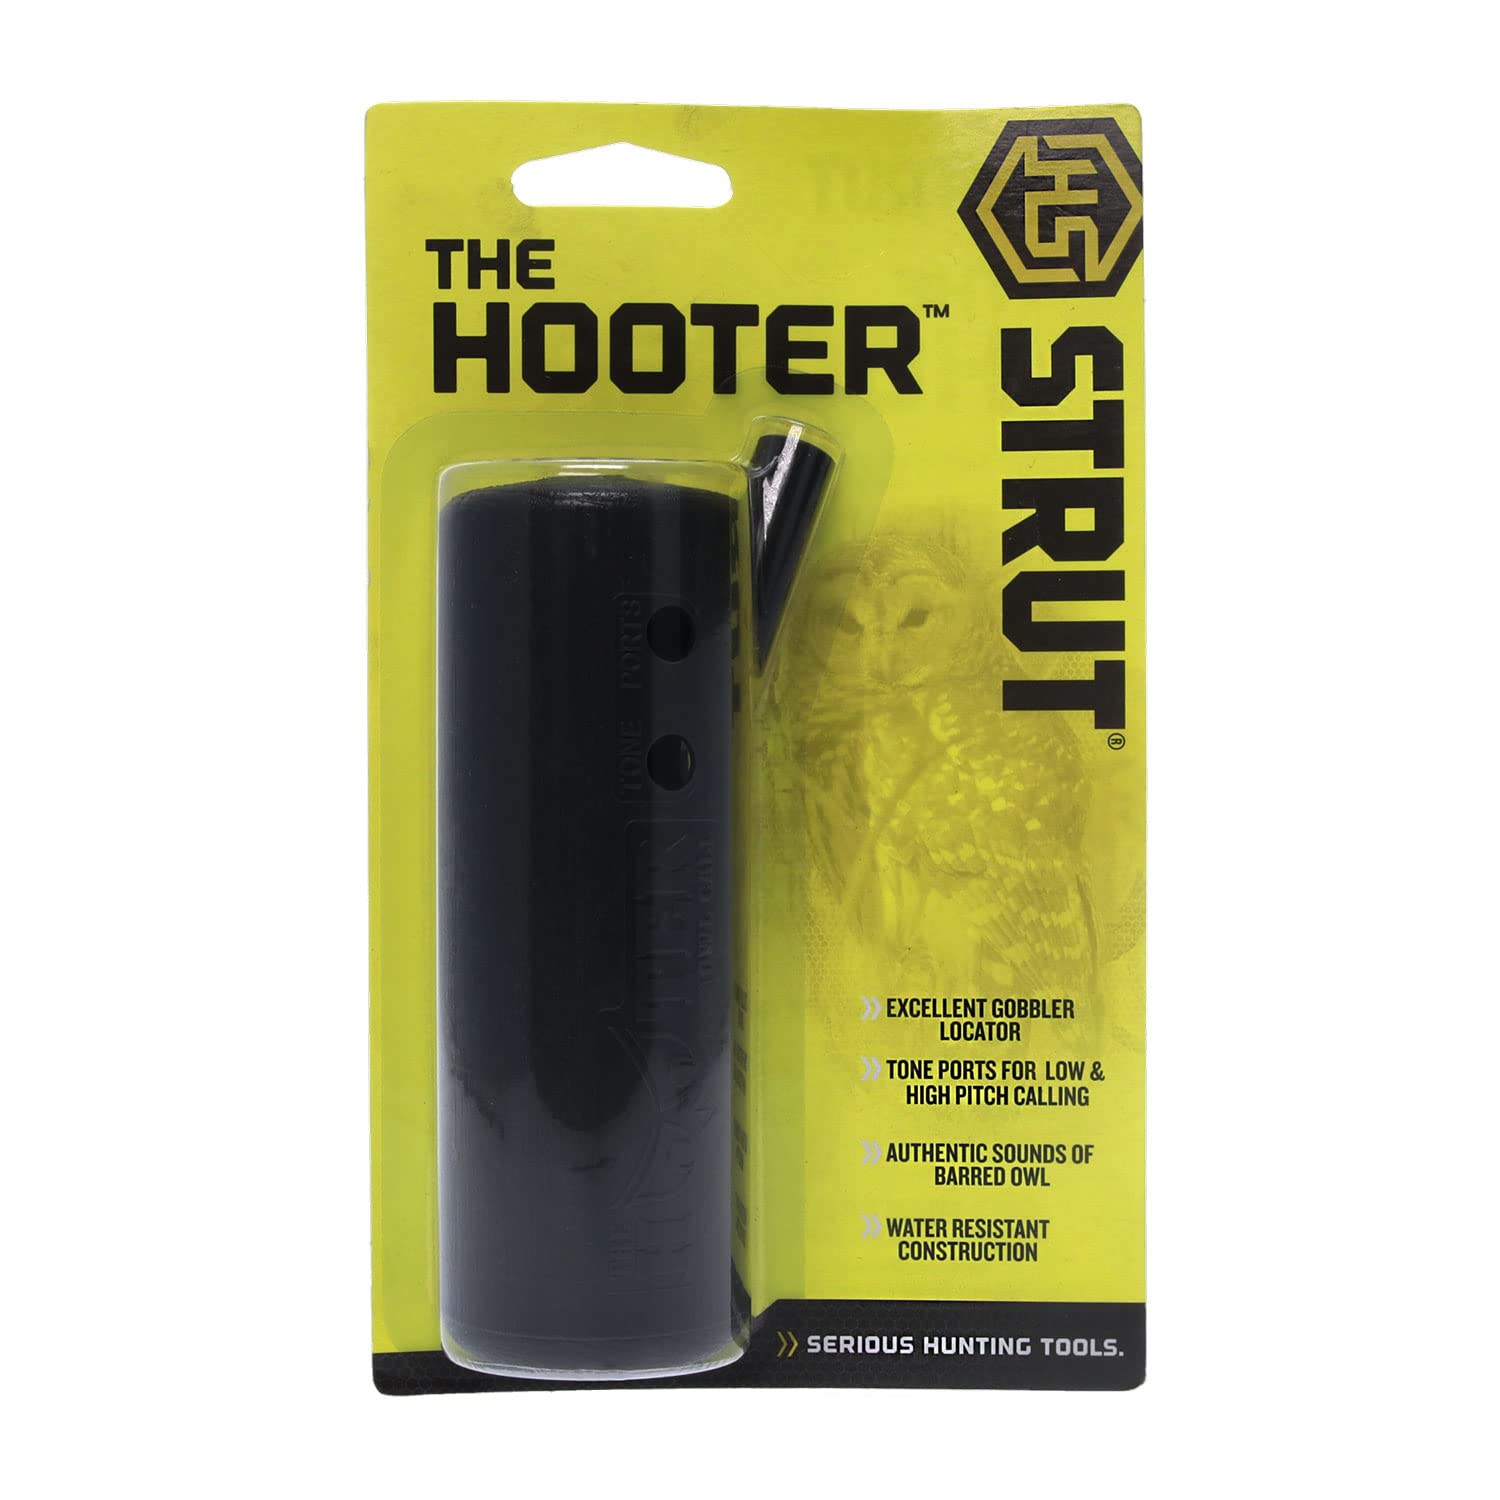 Hunters Specialties Water-Resistant Realistic Sounds H.S. Strut The Hooter Owl Locator Call